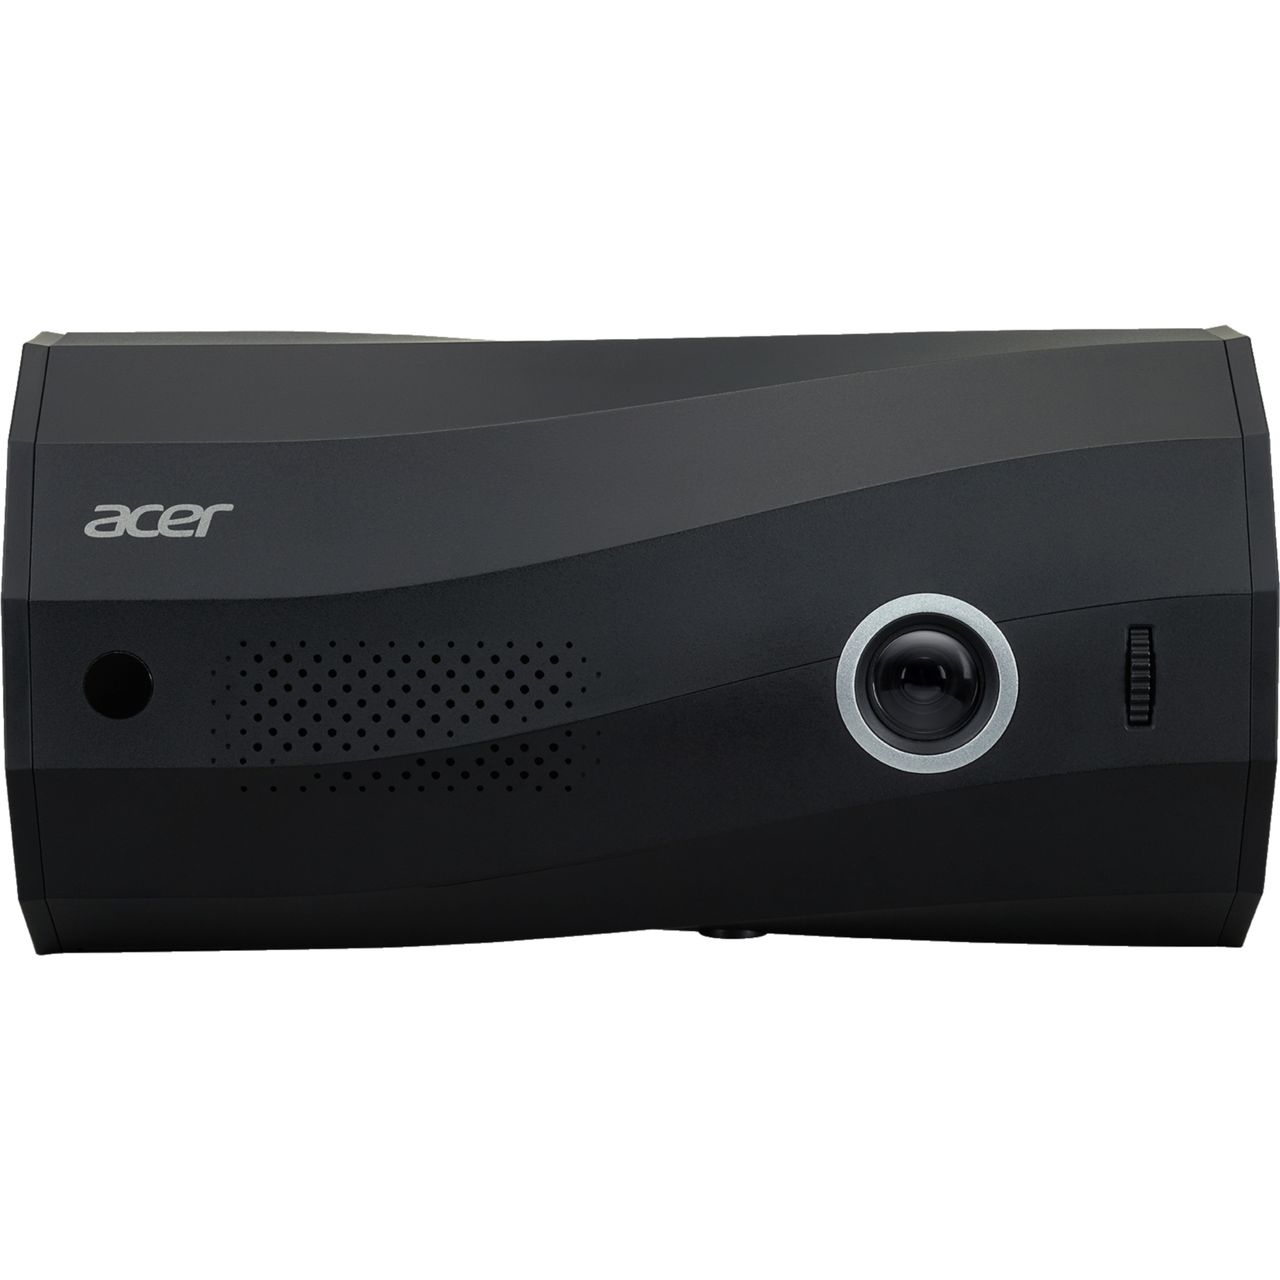 Acer C250i Projector Review